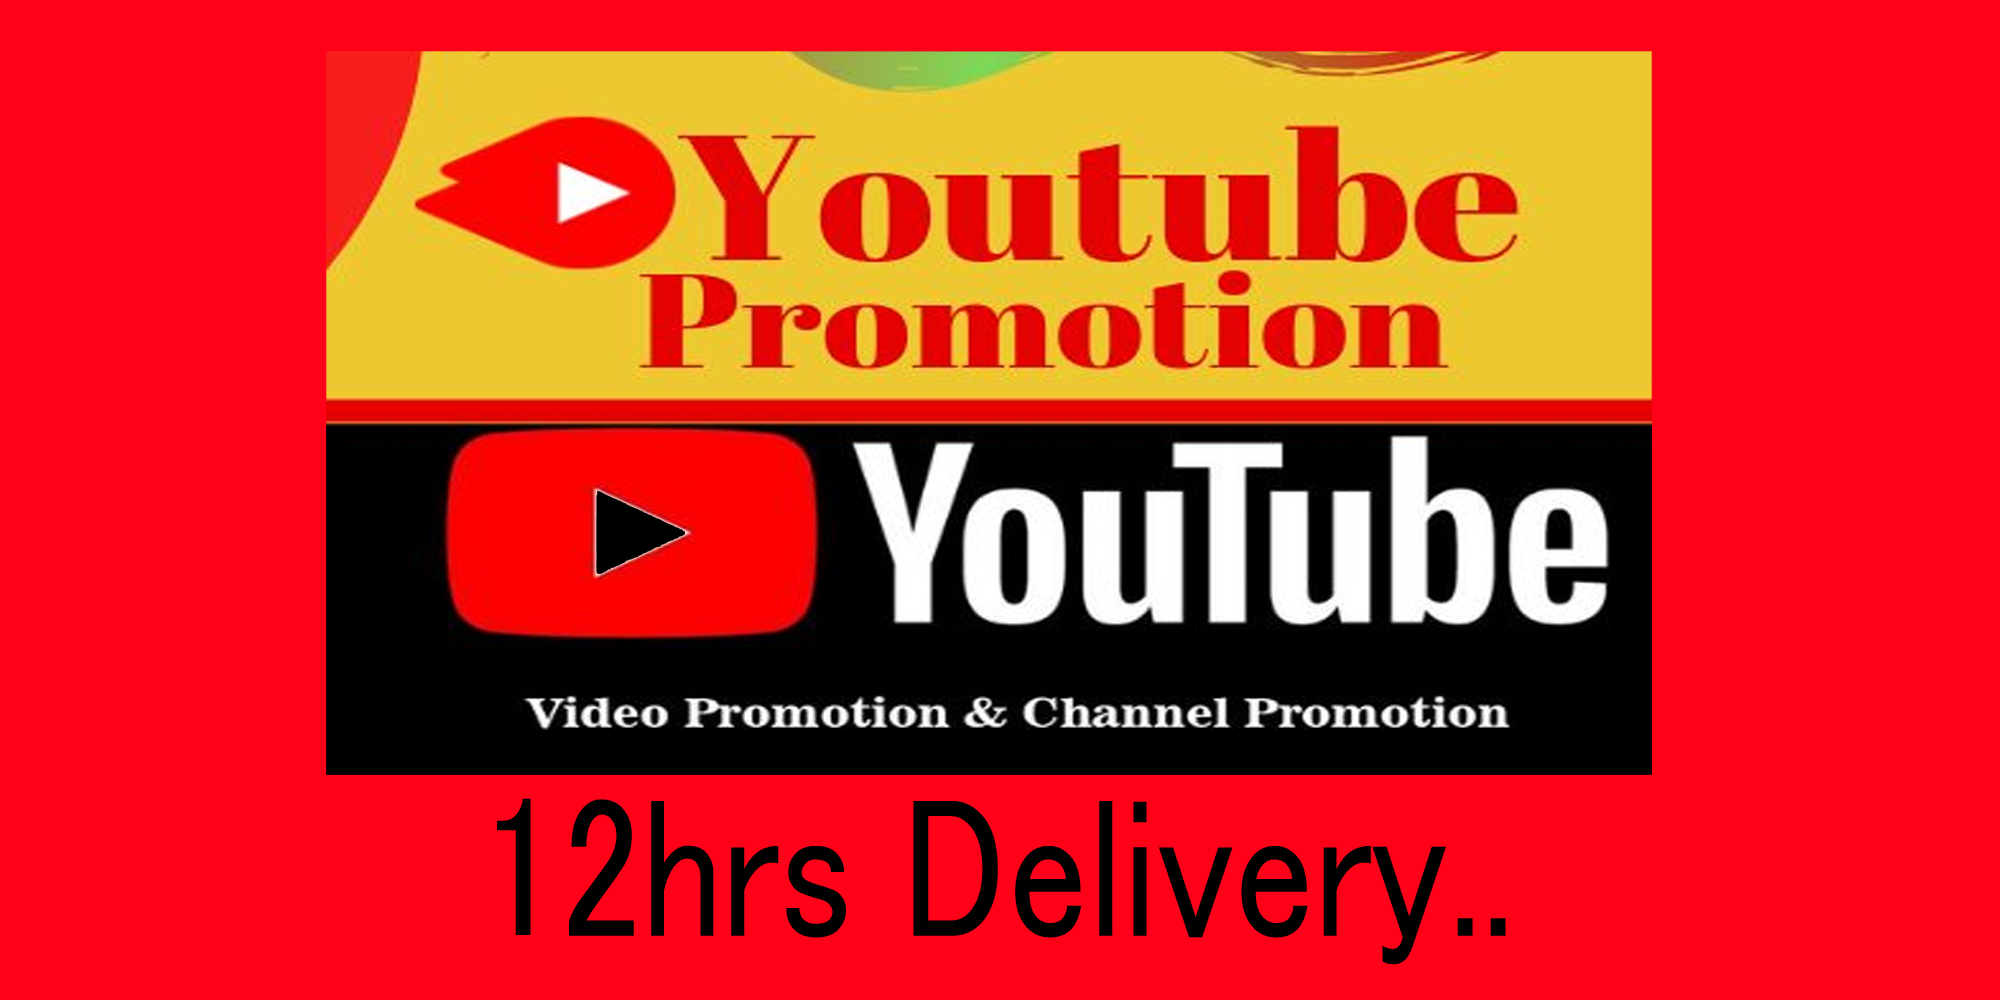 Super discount- Organic YouTube Video Promotion nd music marketing 